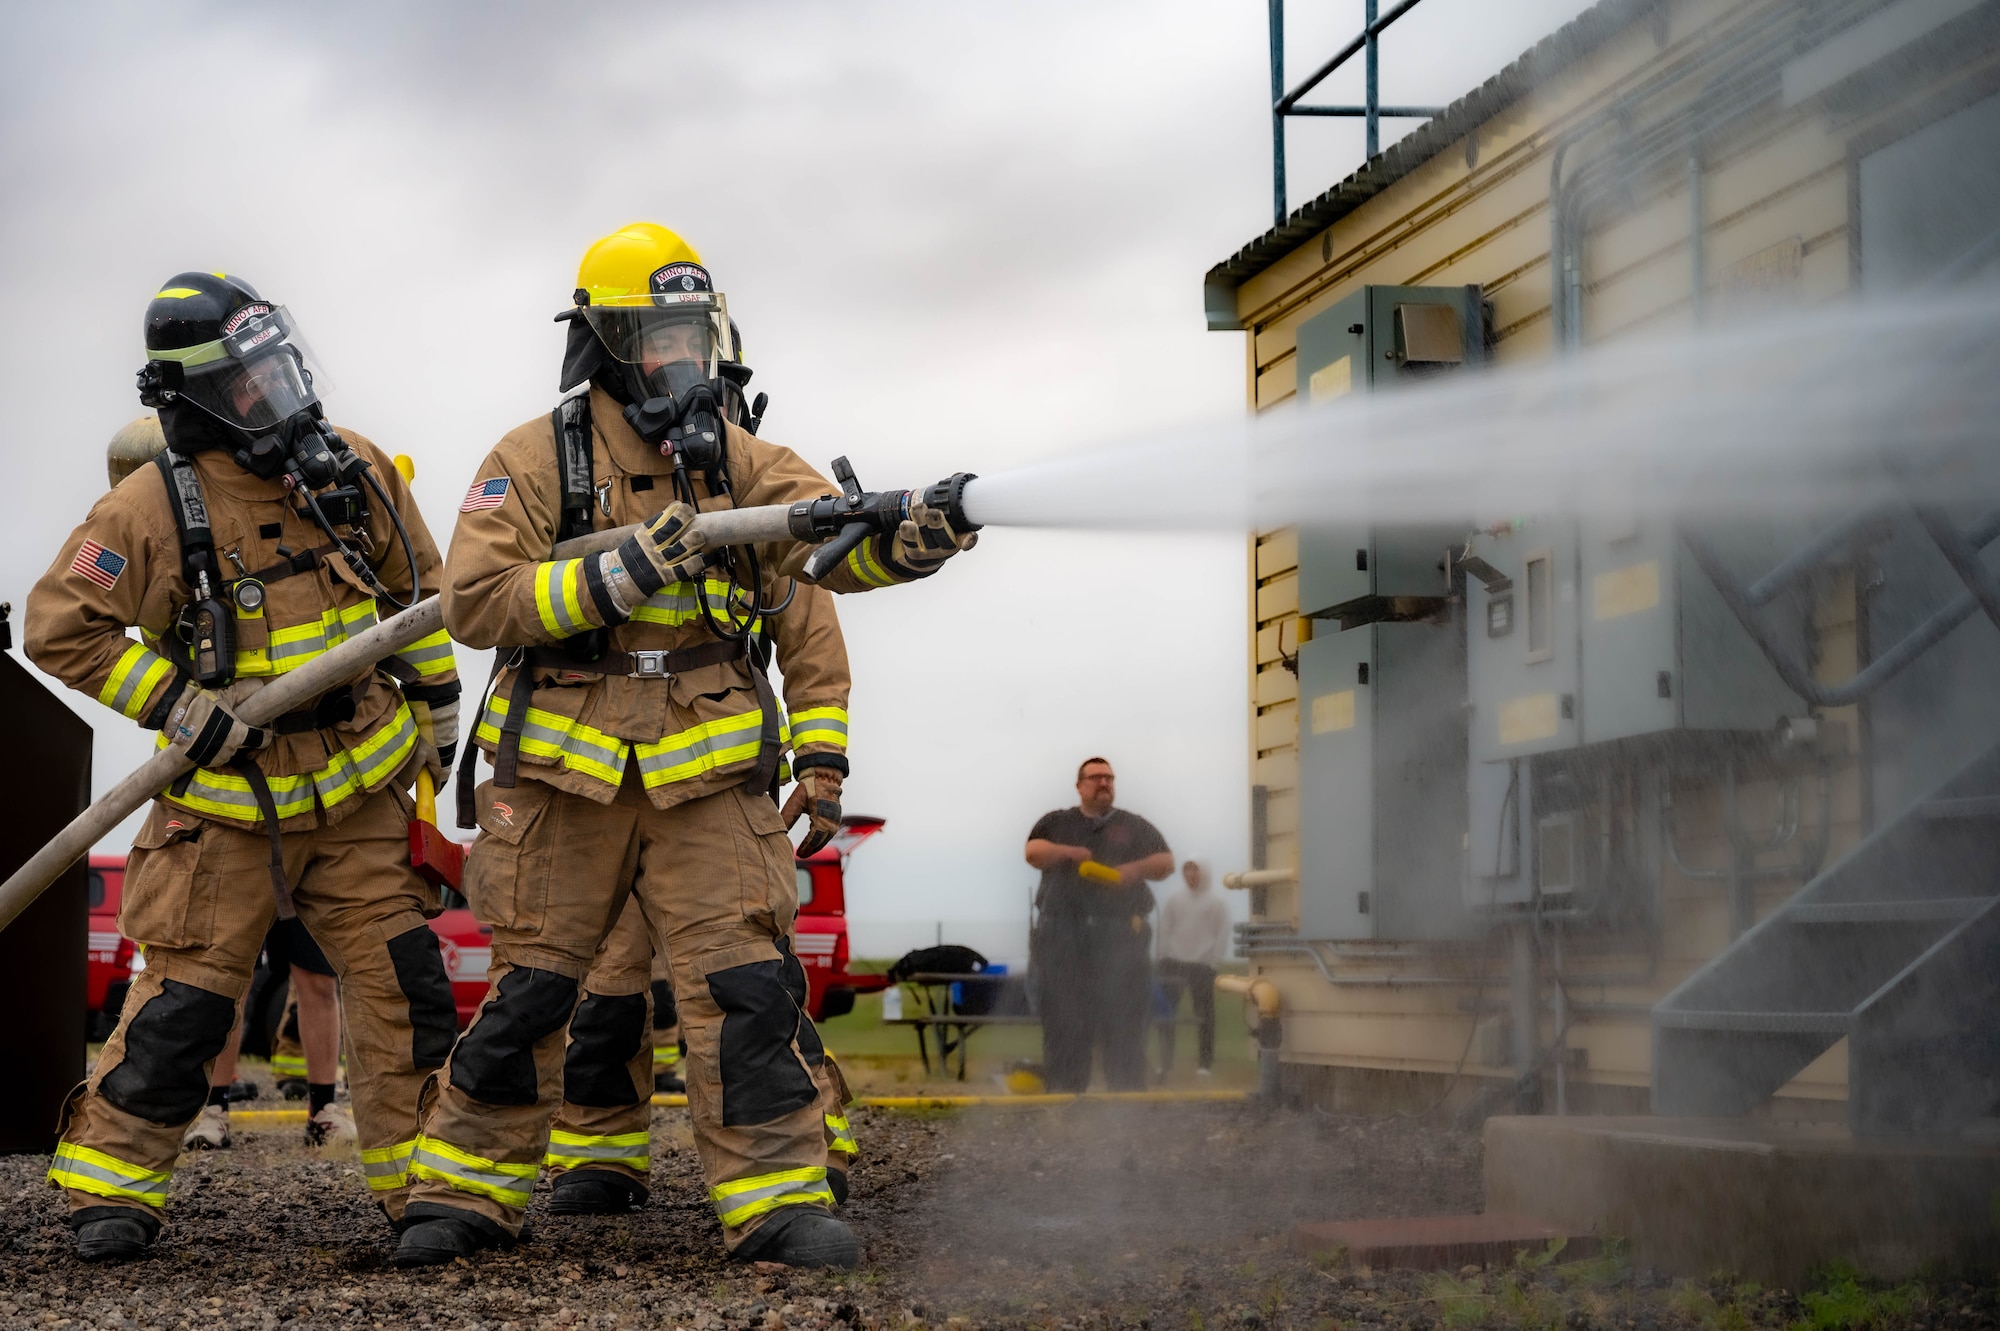 Airman Alberto Alvarez, 5th Civil Engineer Squadron fire protection specialist, tests the equipment before starting a live structure fire exercise at Minot Air Force Base, North Dakota, Aug. 21, 2023. The usual working pressure of a firehose can vary between 116 and 290 psi. (U.S. Air Force photo by Airman 1st Class Alexander Nottingham)